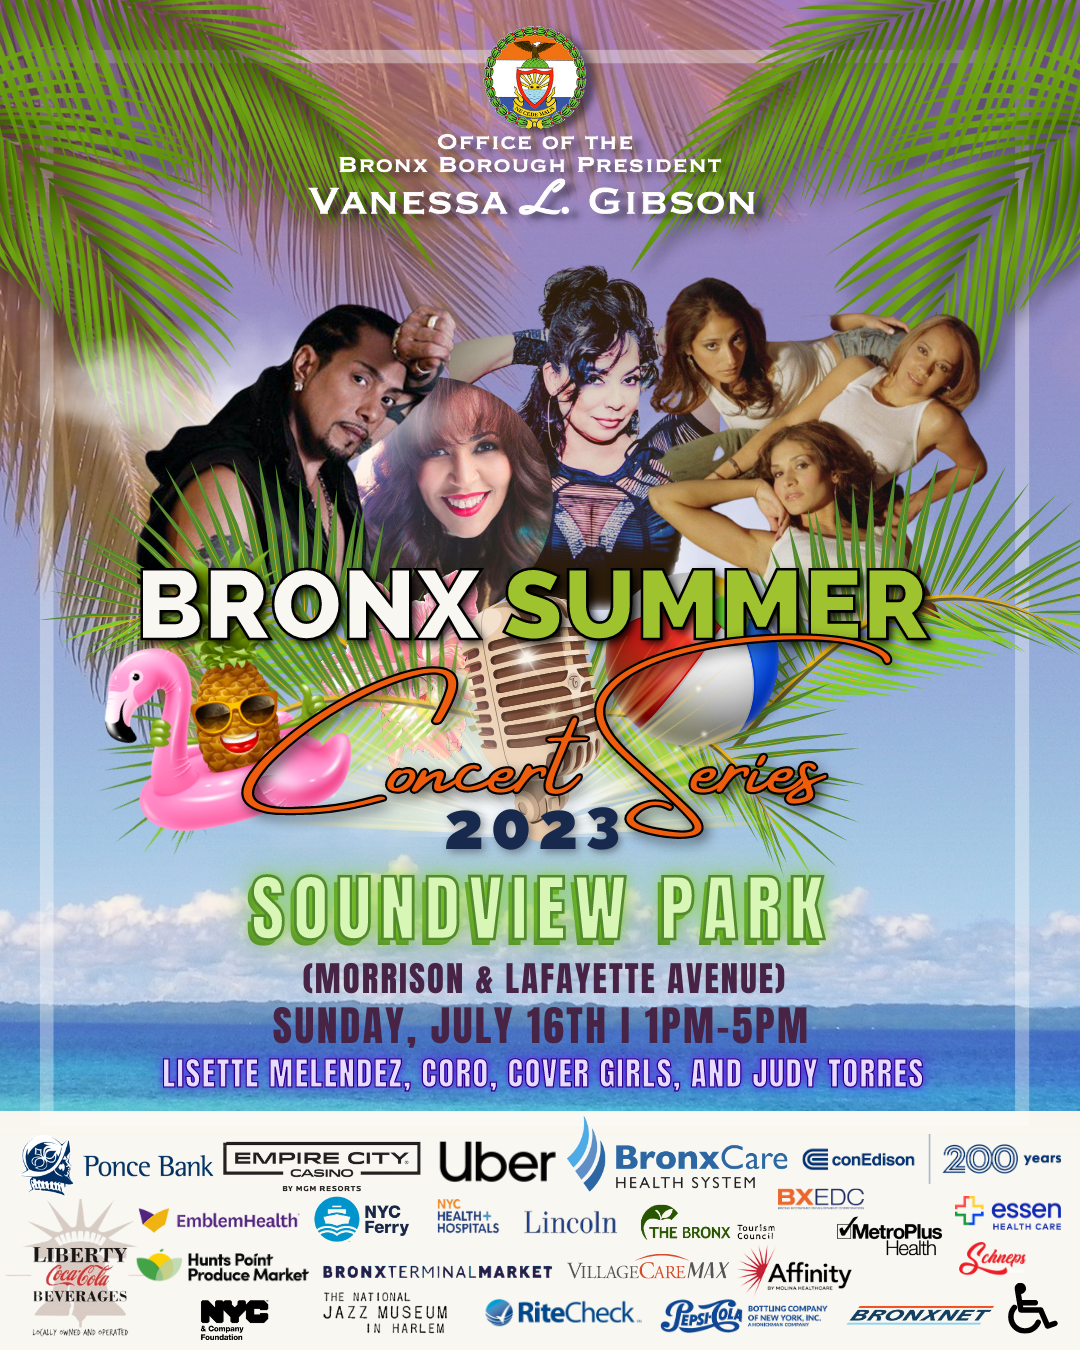 A flyer for the Bronx Summer Concert Series event on July 16, 2023.